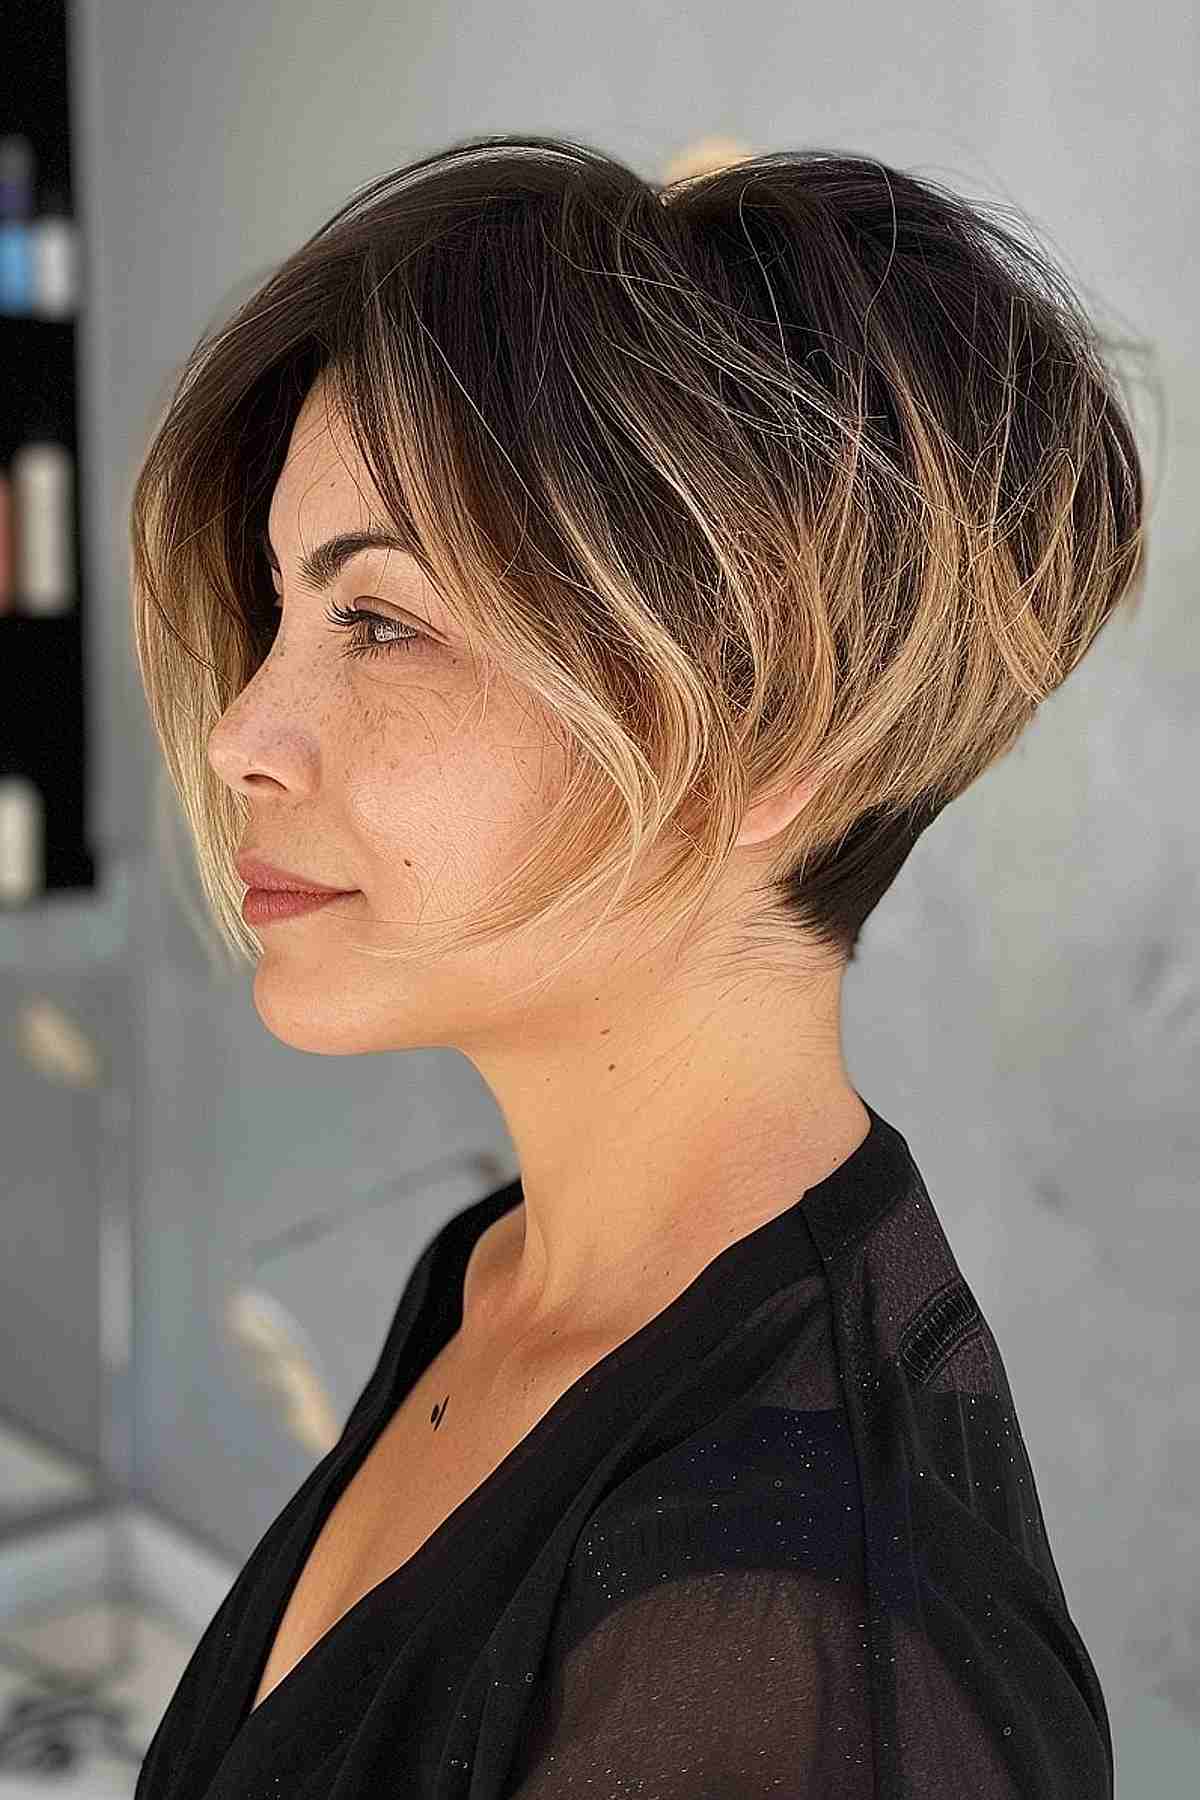 Short stacked pixie bob with dark roots and light blonde highlights